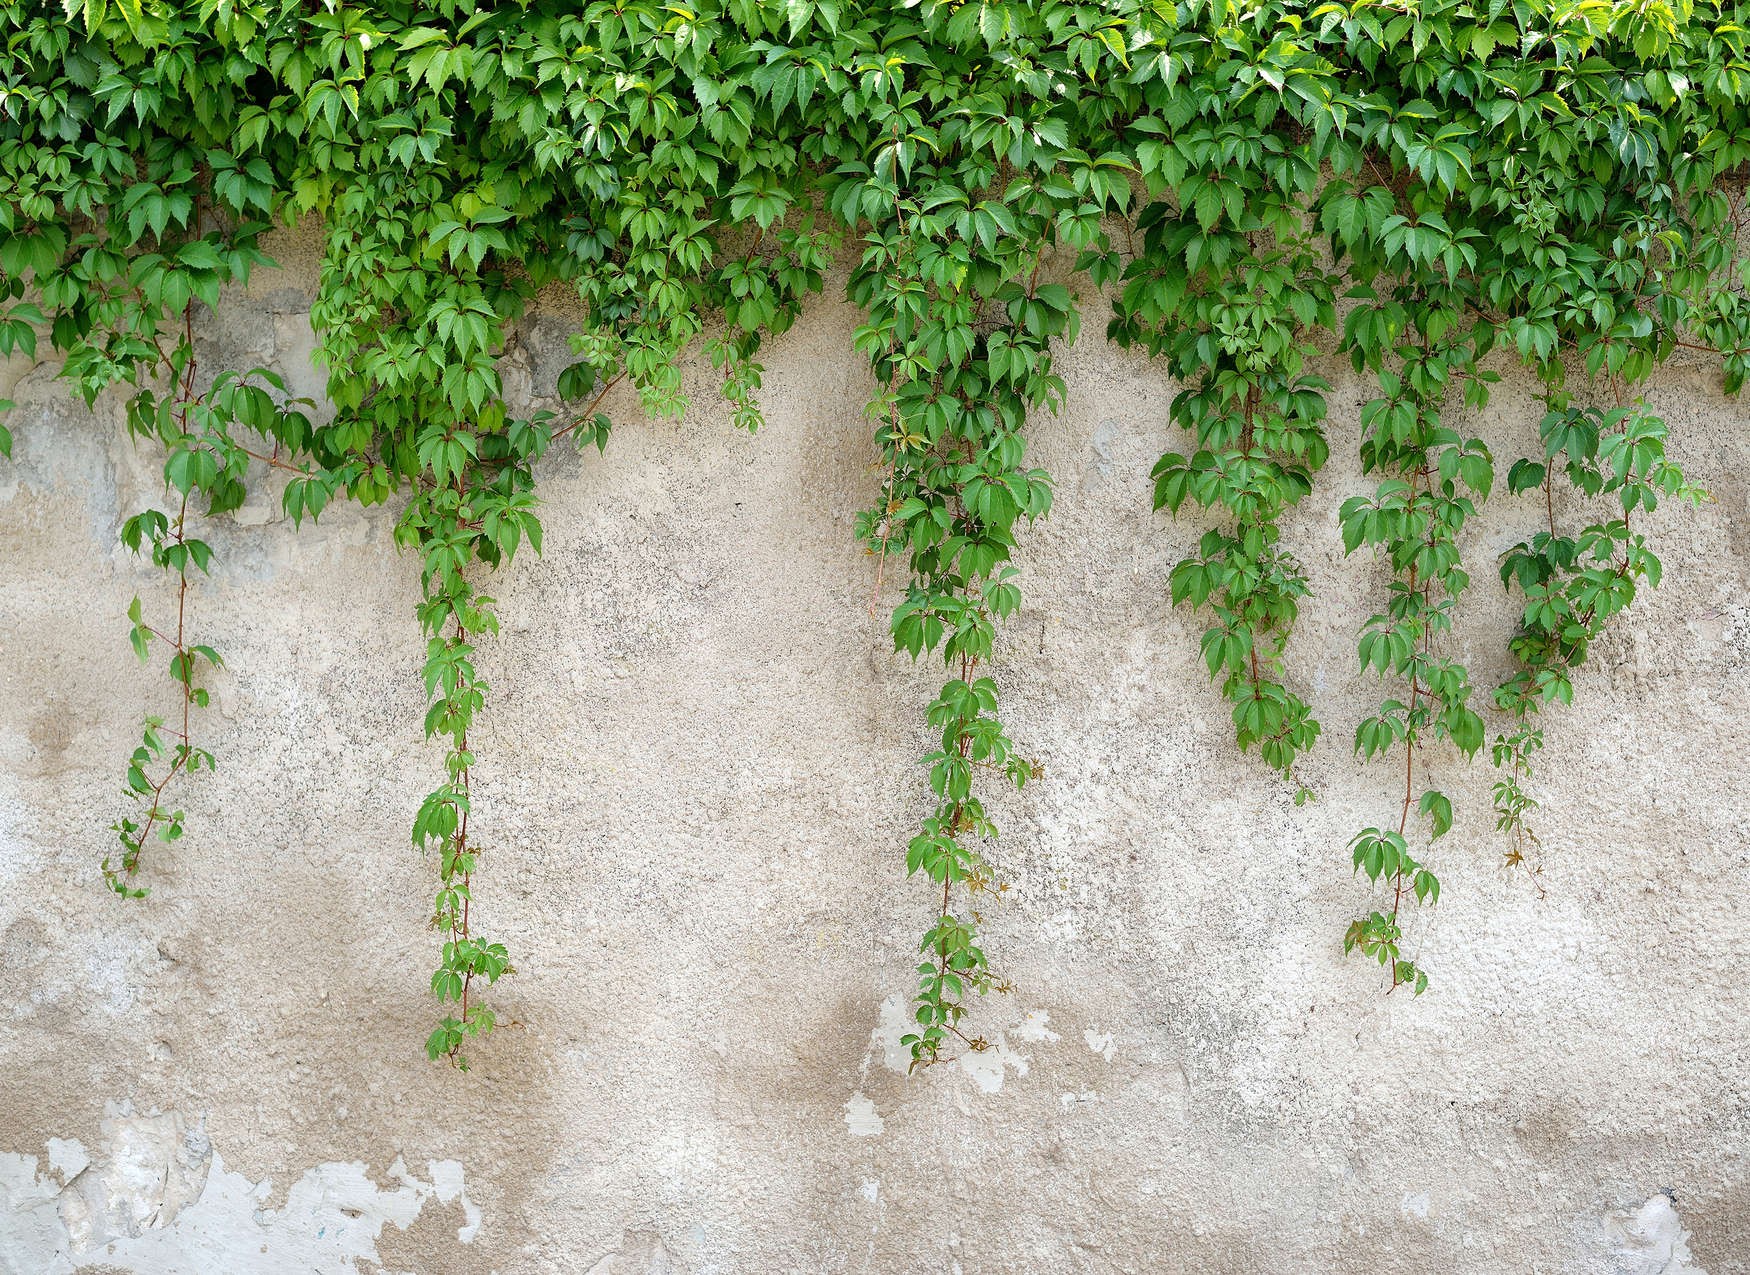             Concrete wall with leaf tendrils - green, grey
        